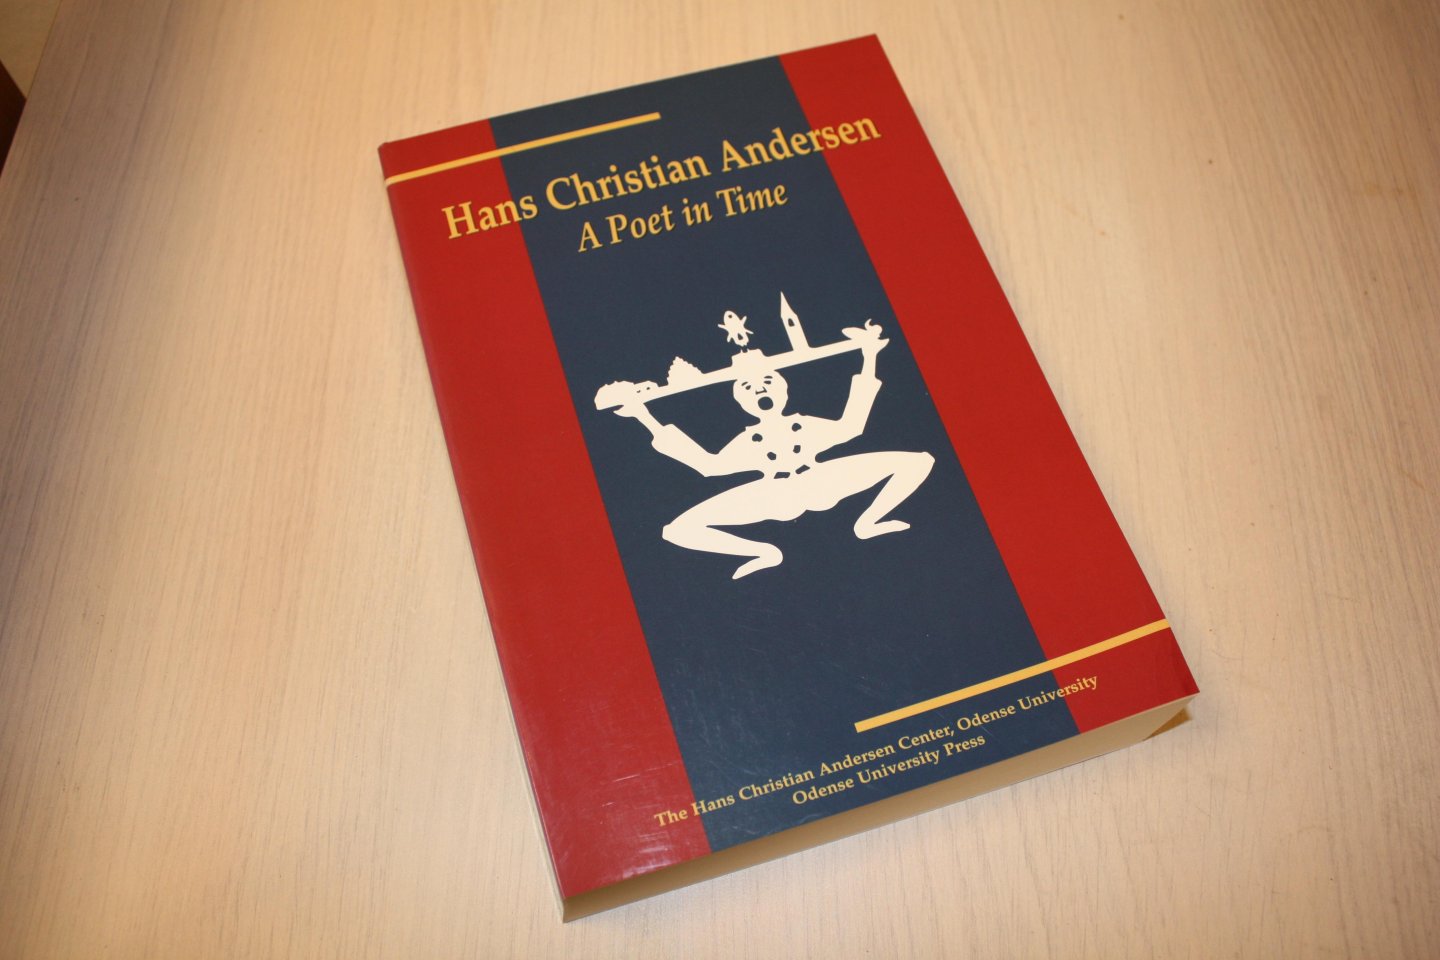 International Hans Christian Andersen Conference 1996 Odense, denmark - Hans Christian Andersen / A Poet in Time : Papers from the Second International Hans Christian Andersen Conference 29 July to 2 August 1996